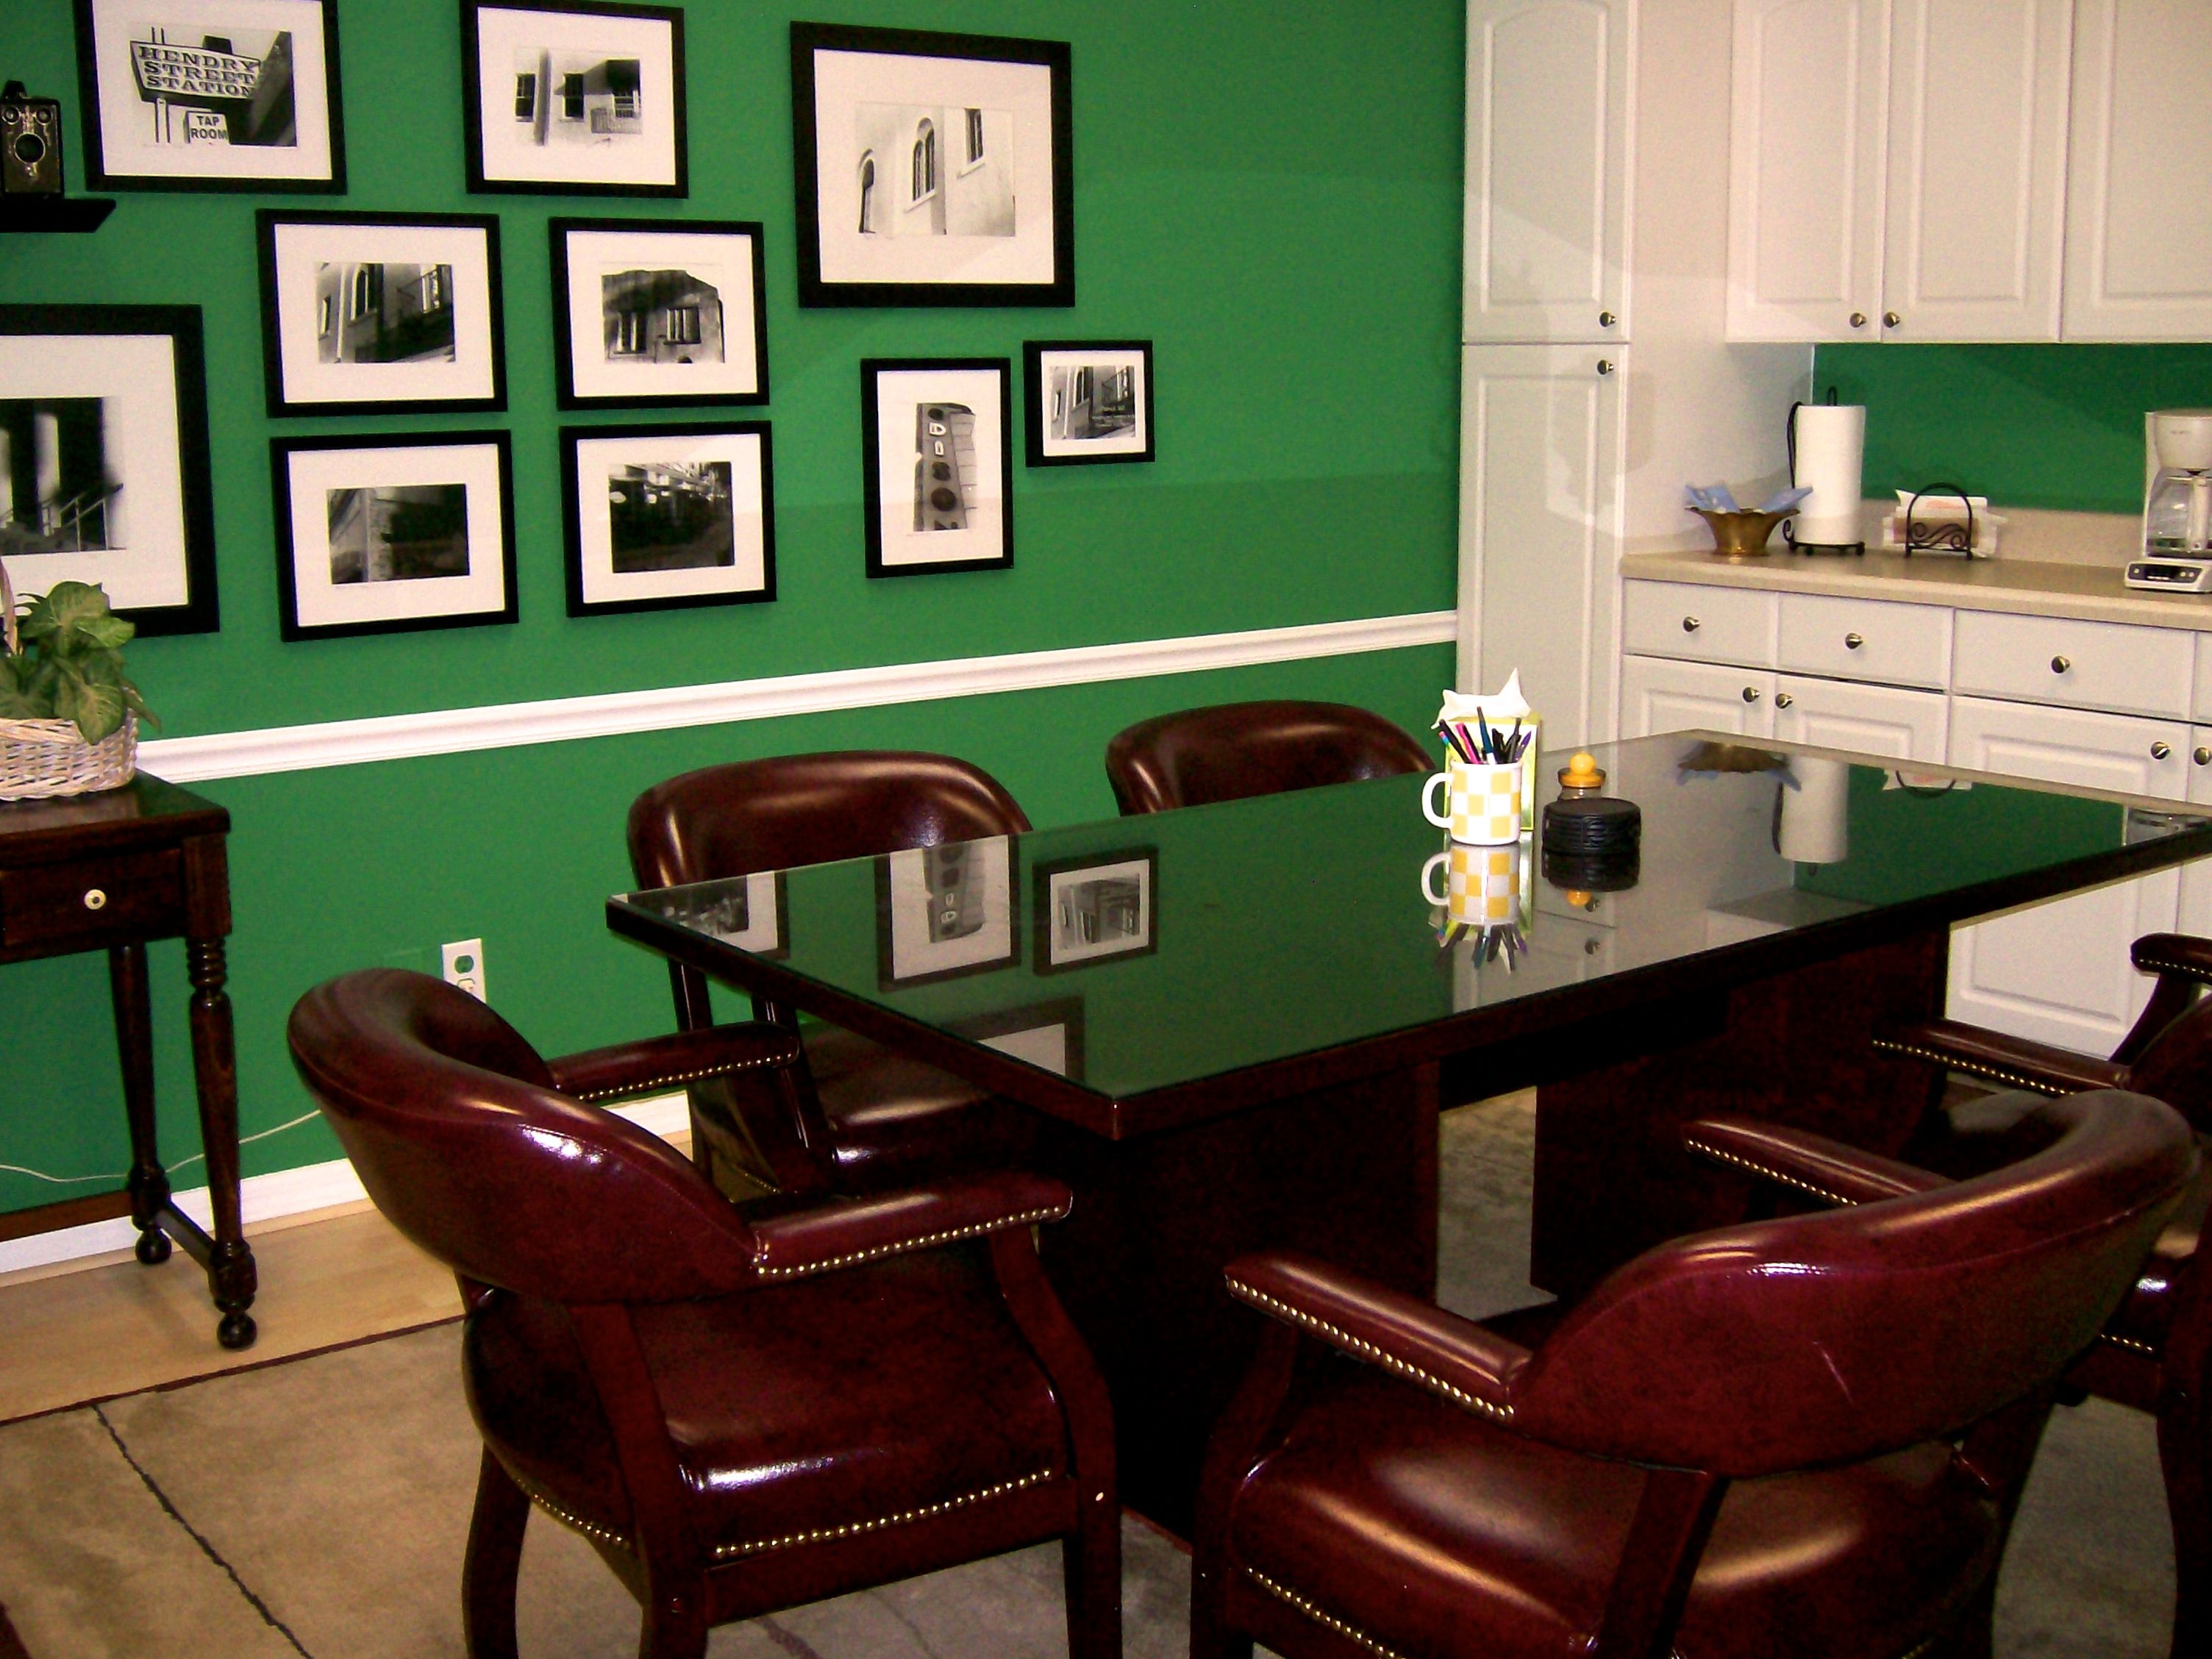 Conference room with table and chairs, kitchenette and pictures on the wall